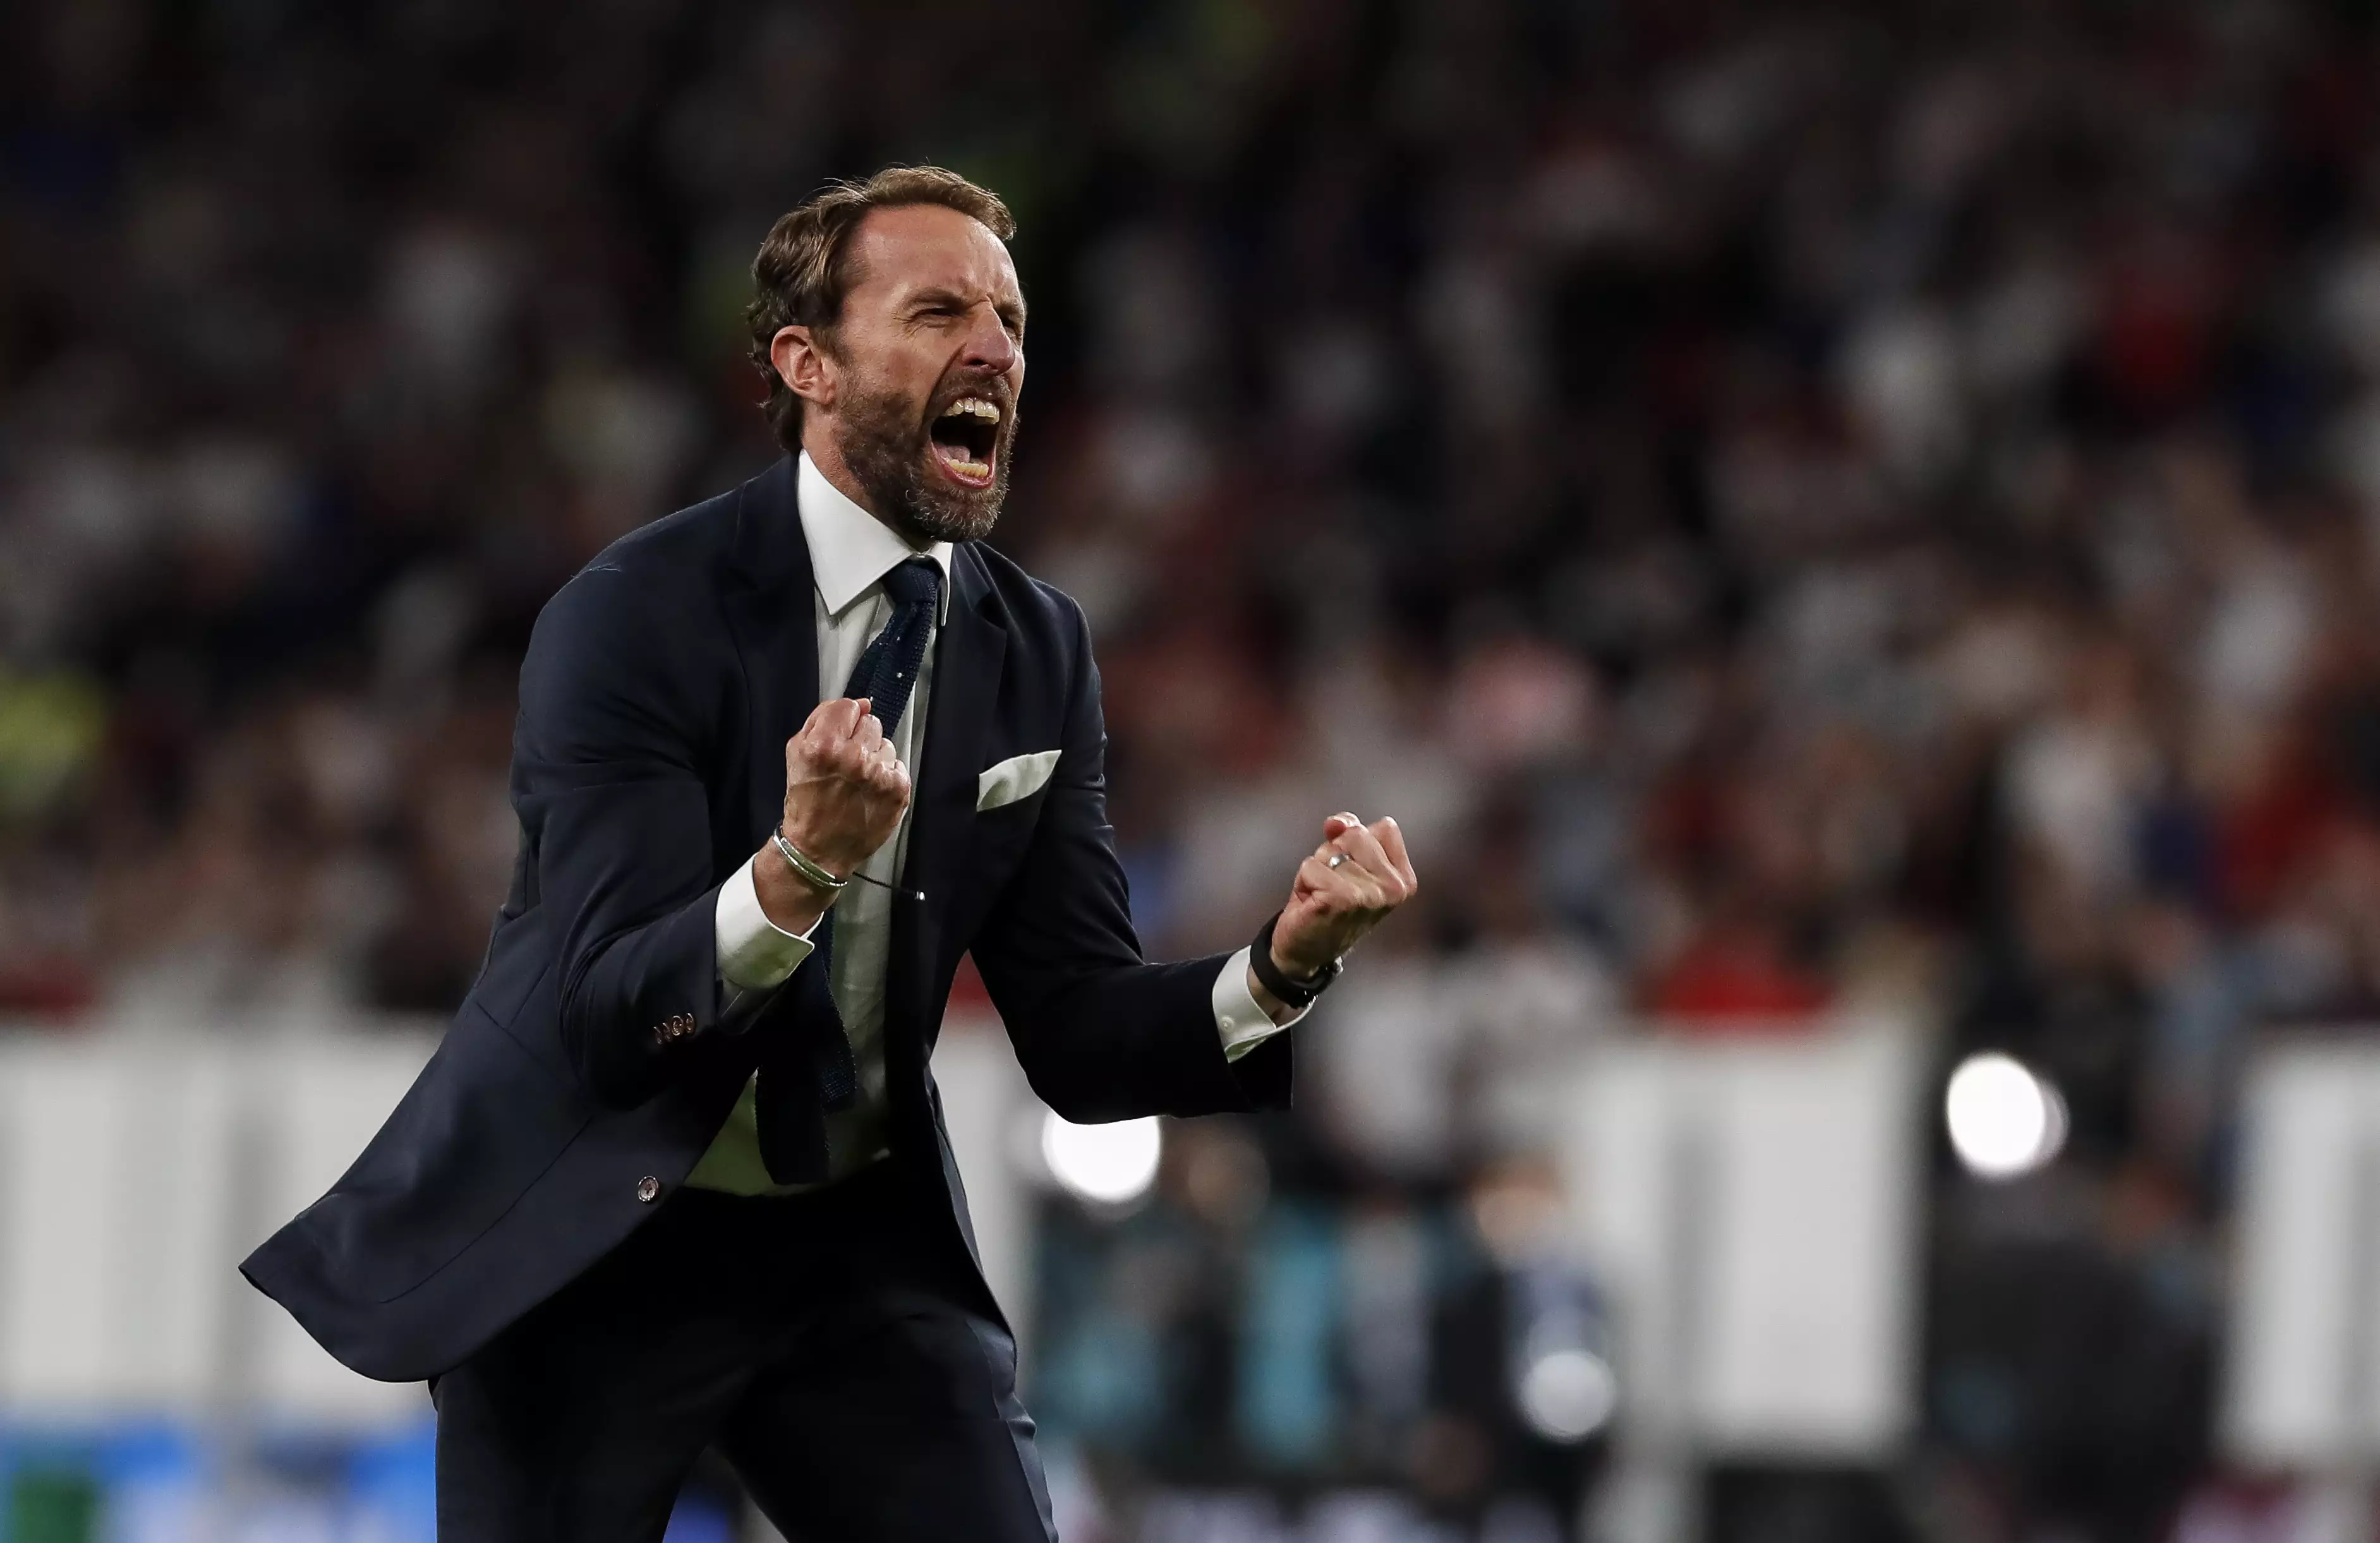 England will now play Italy in the final.